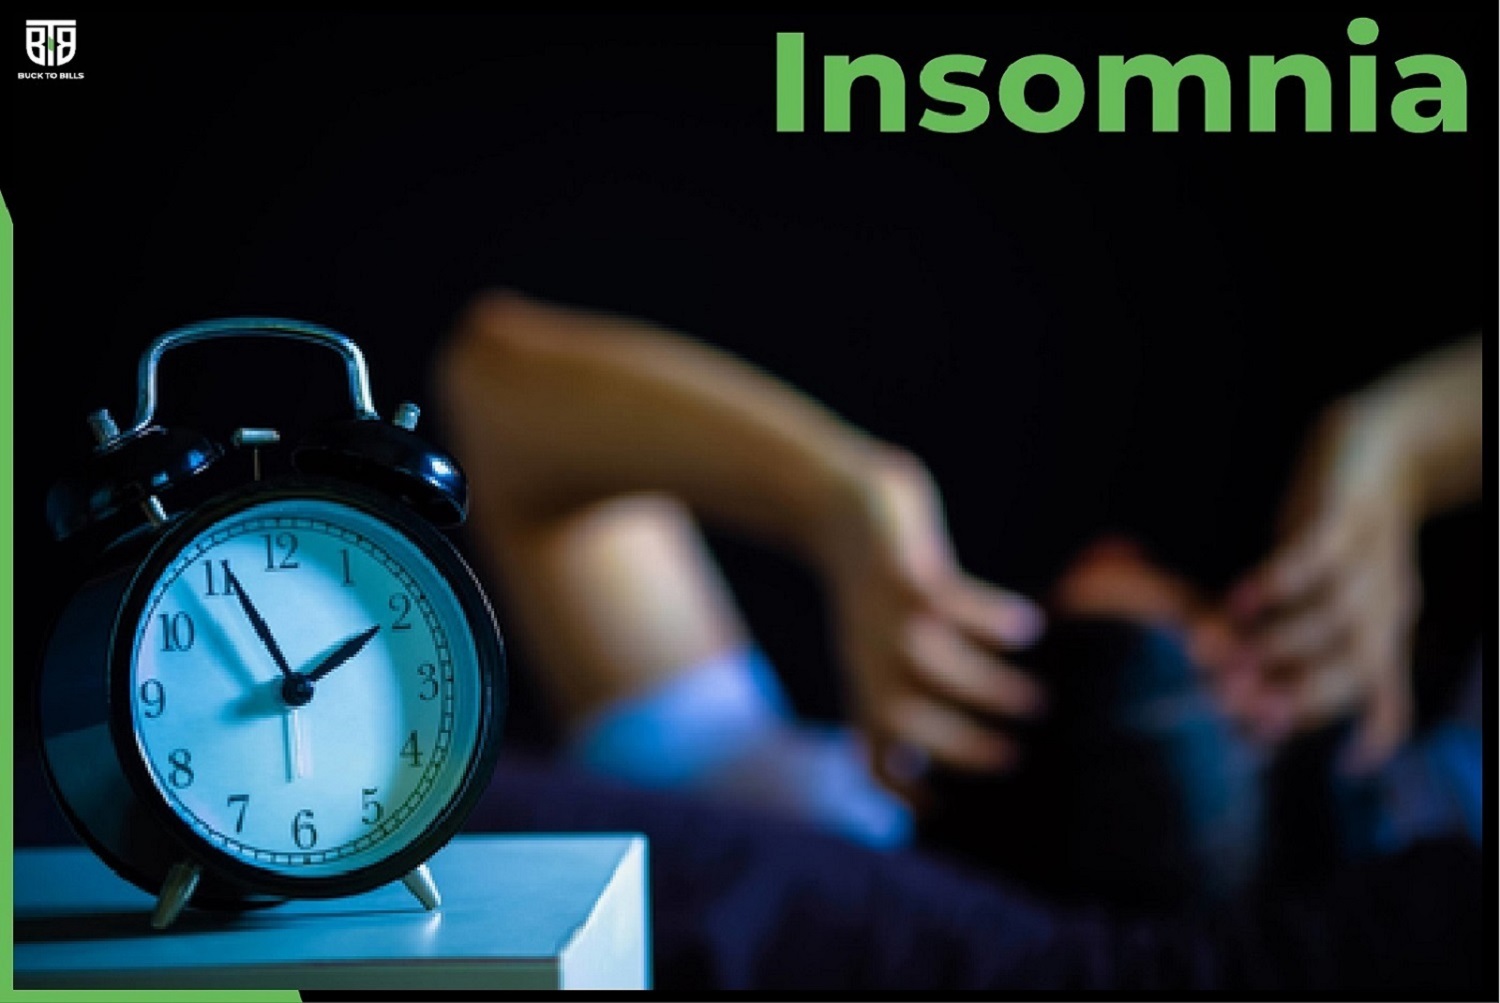 All you need to know about Insomnia